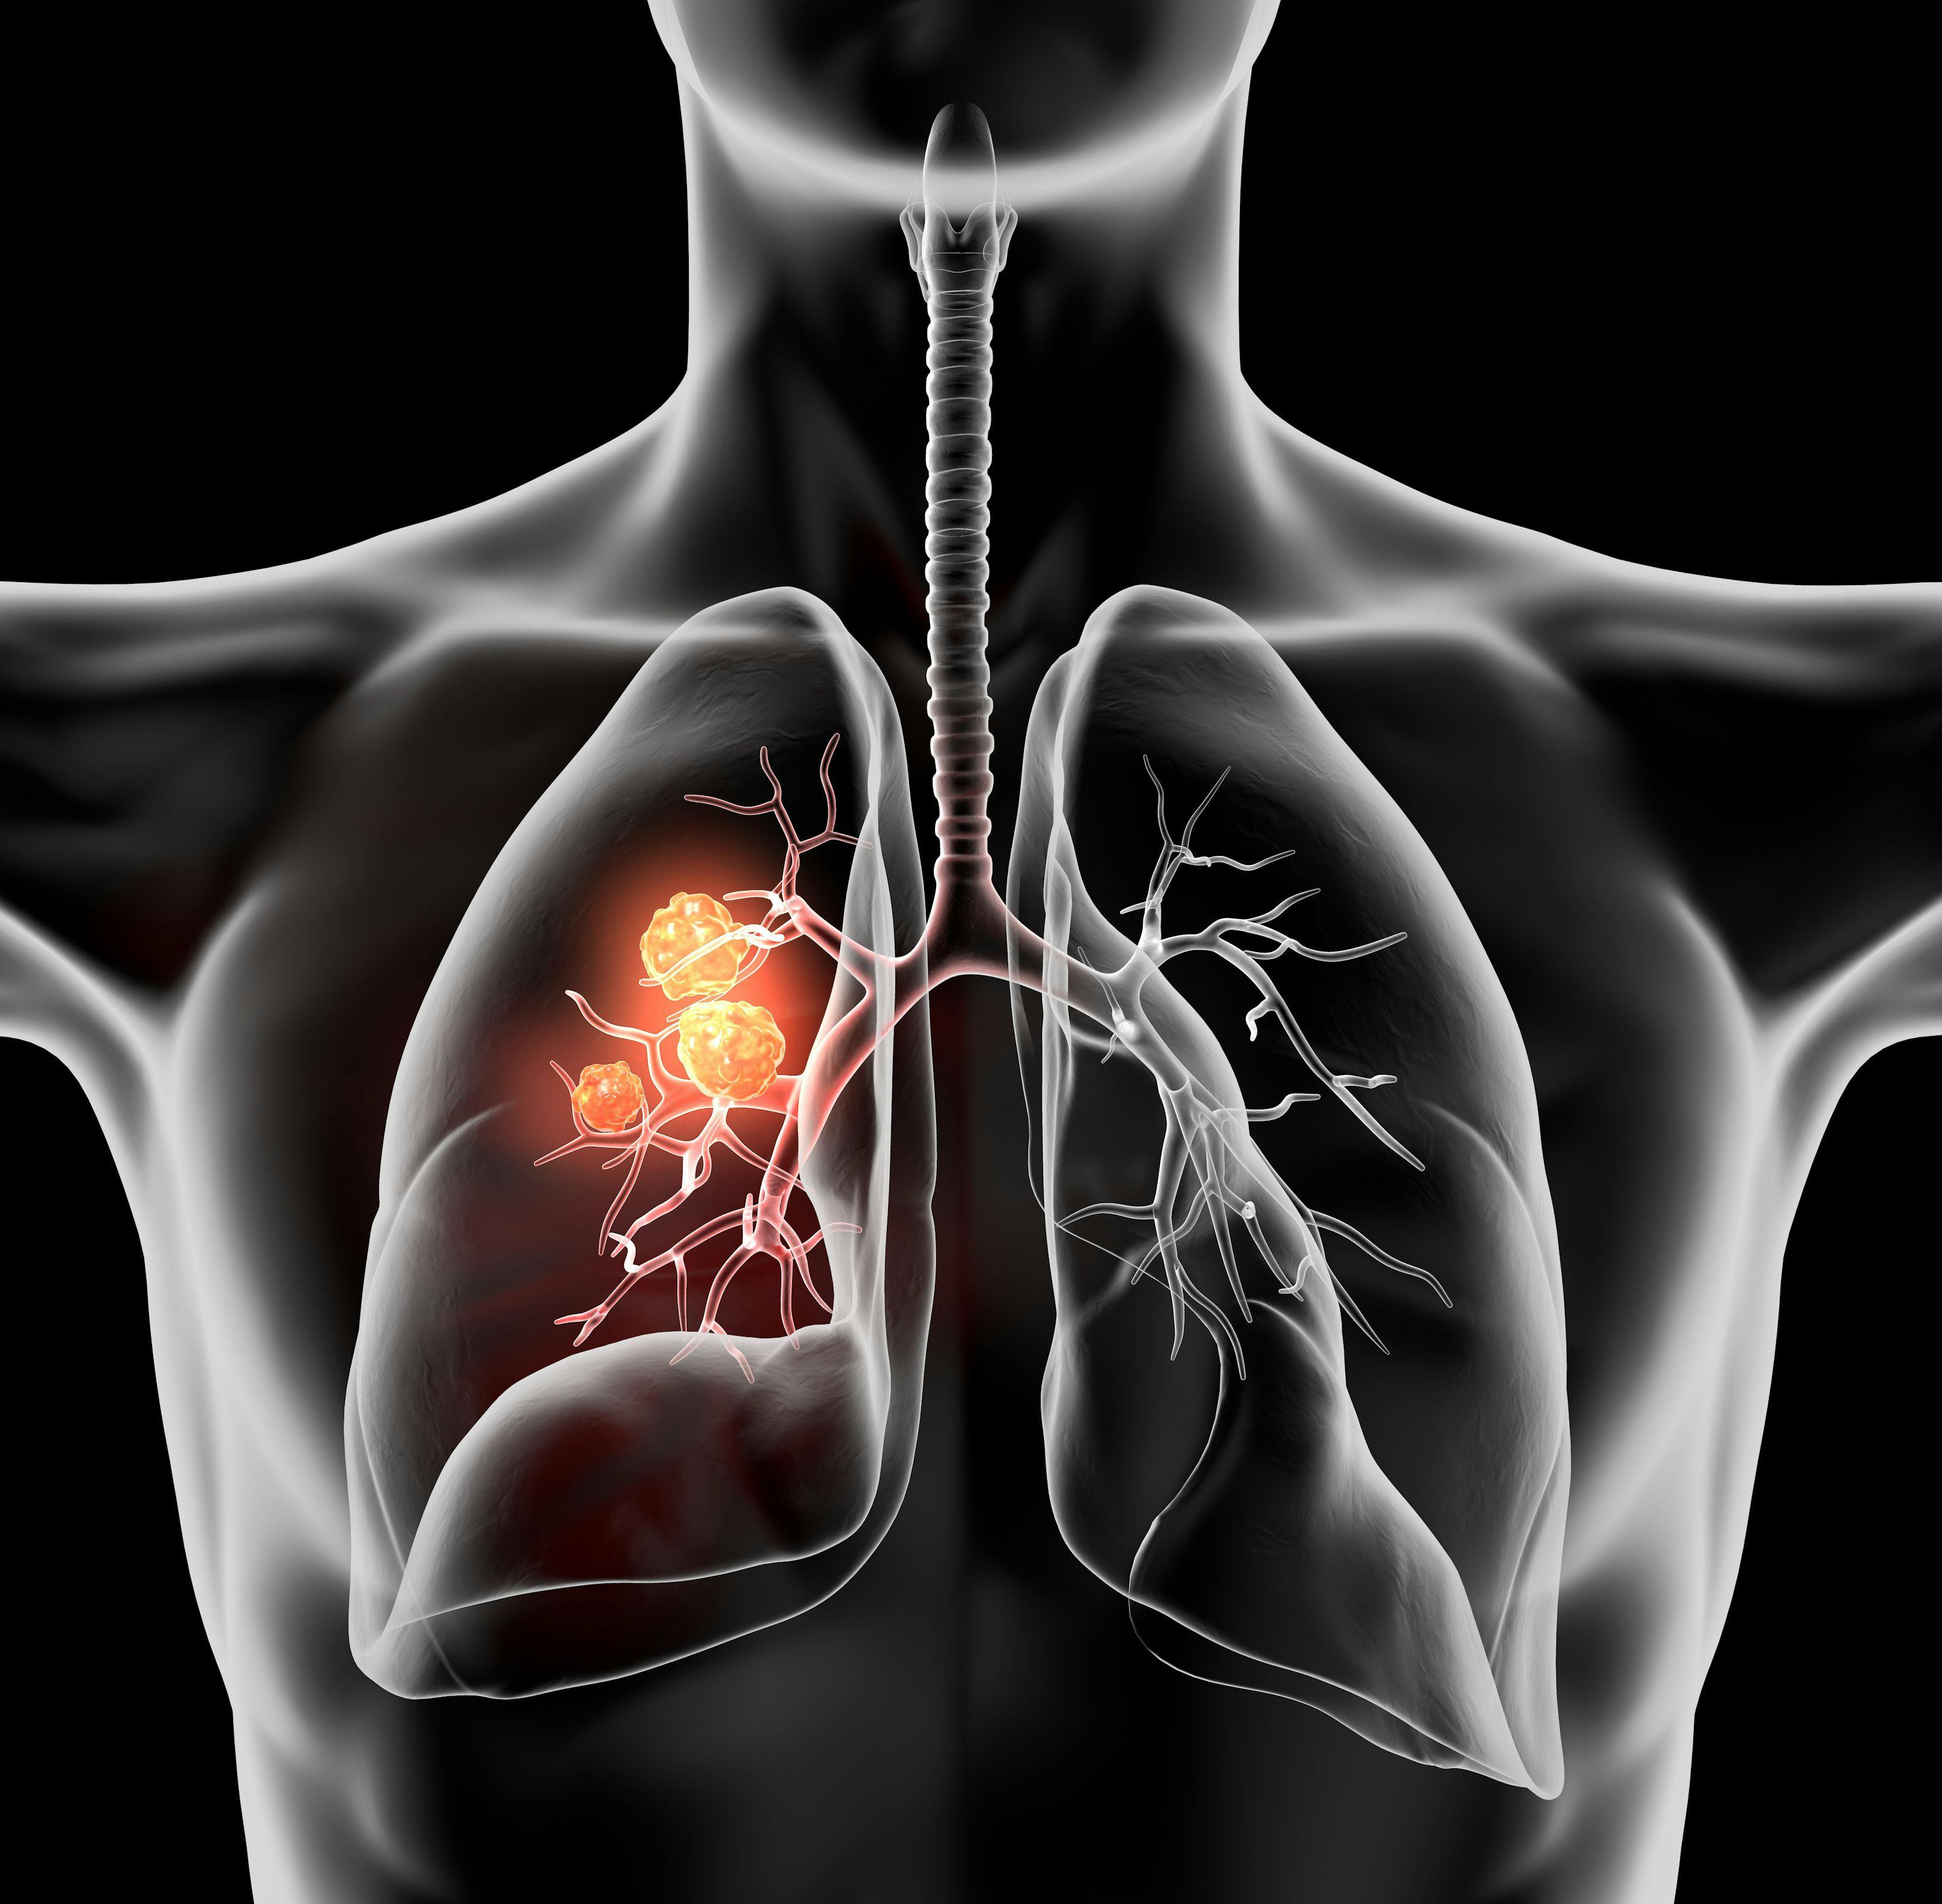 ctDNA Reductions Associated With Improved Clinical Outcomes in NSCLC Treated With IO